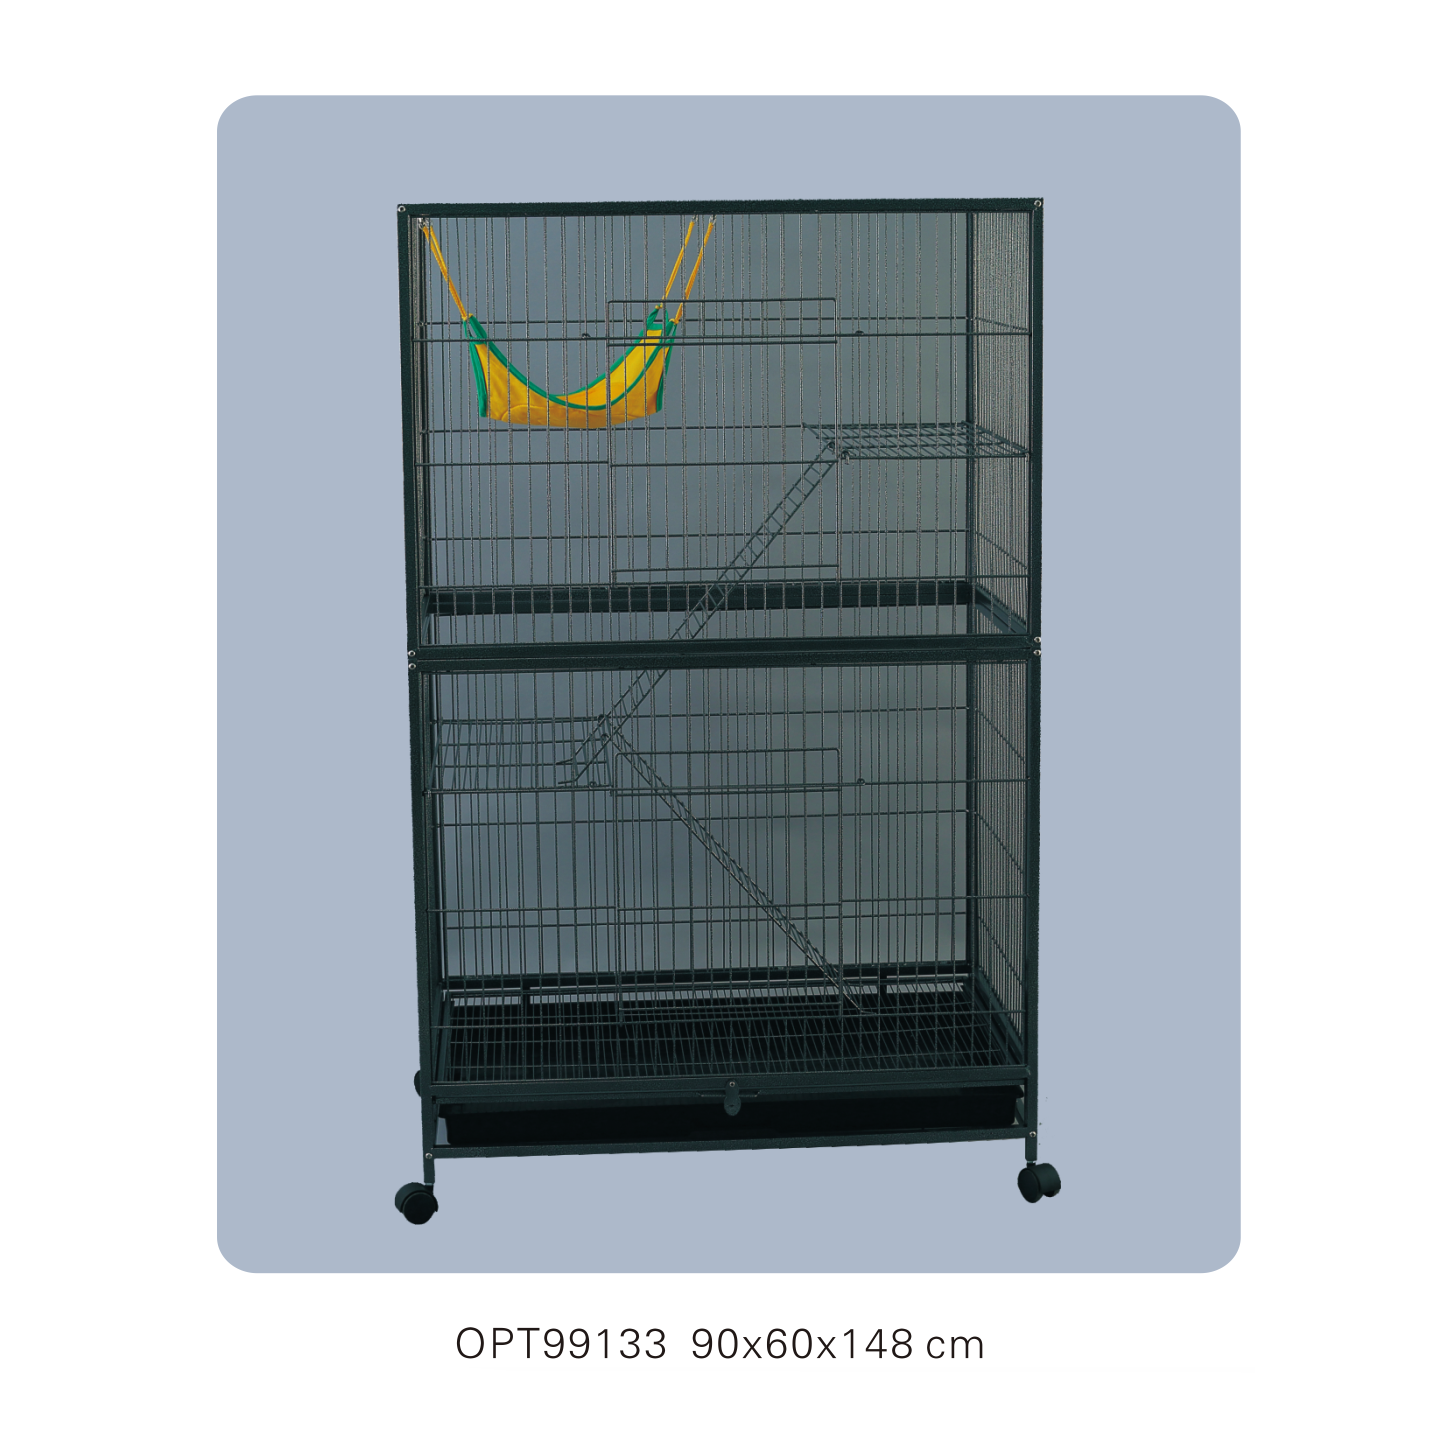 OPT99133 90x60x148cm small animal cages